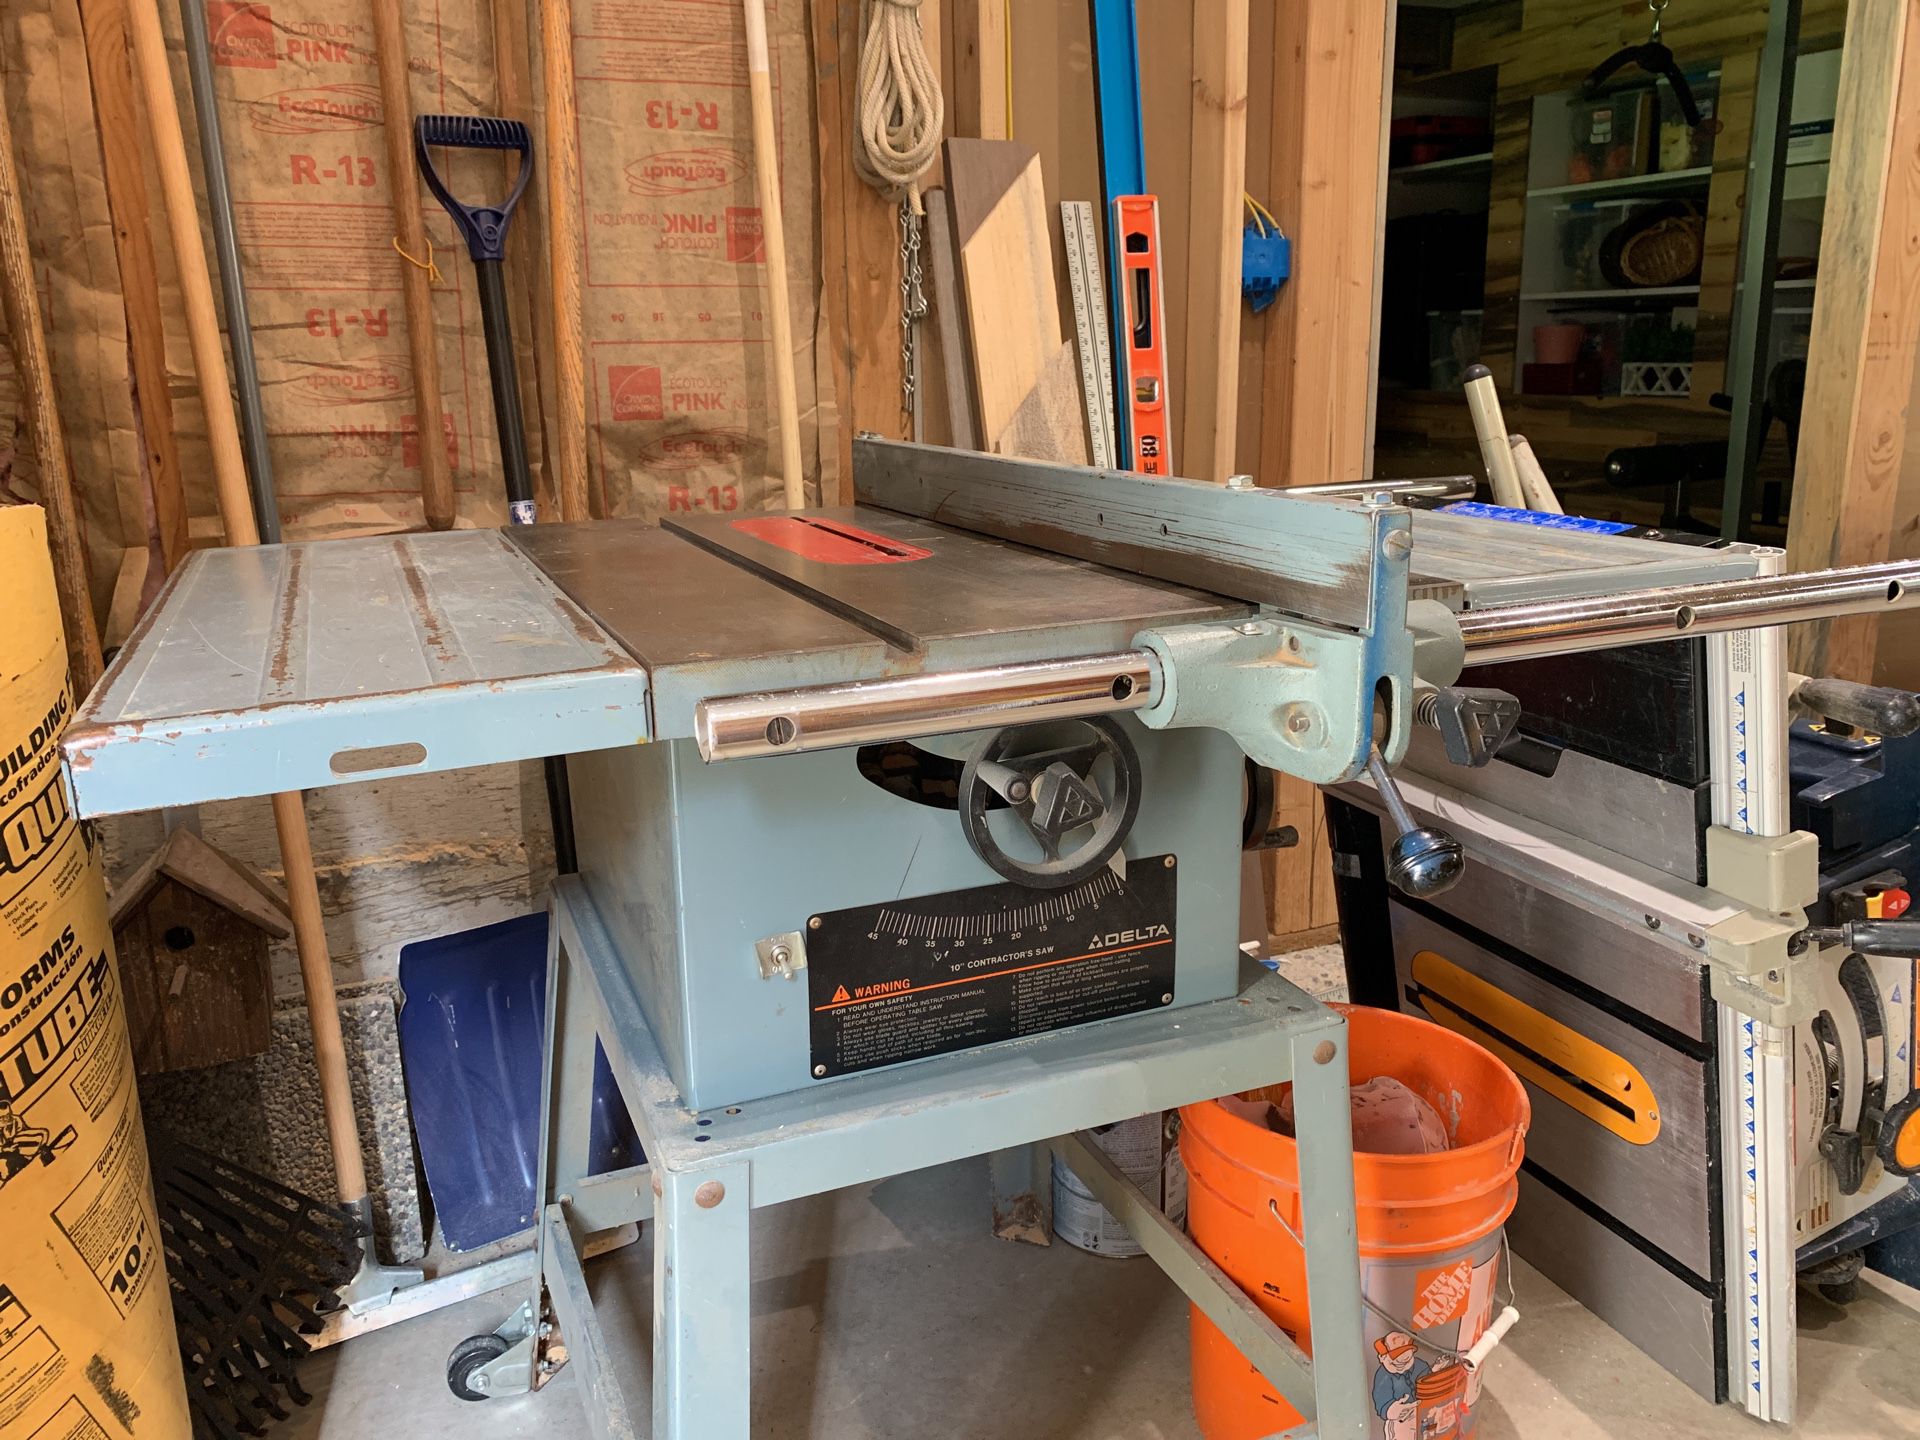 Delta 10” table saw